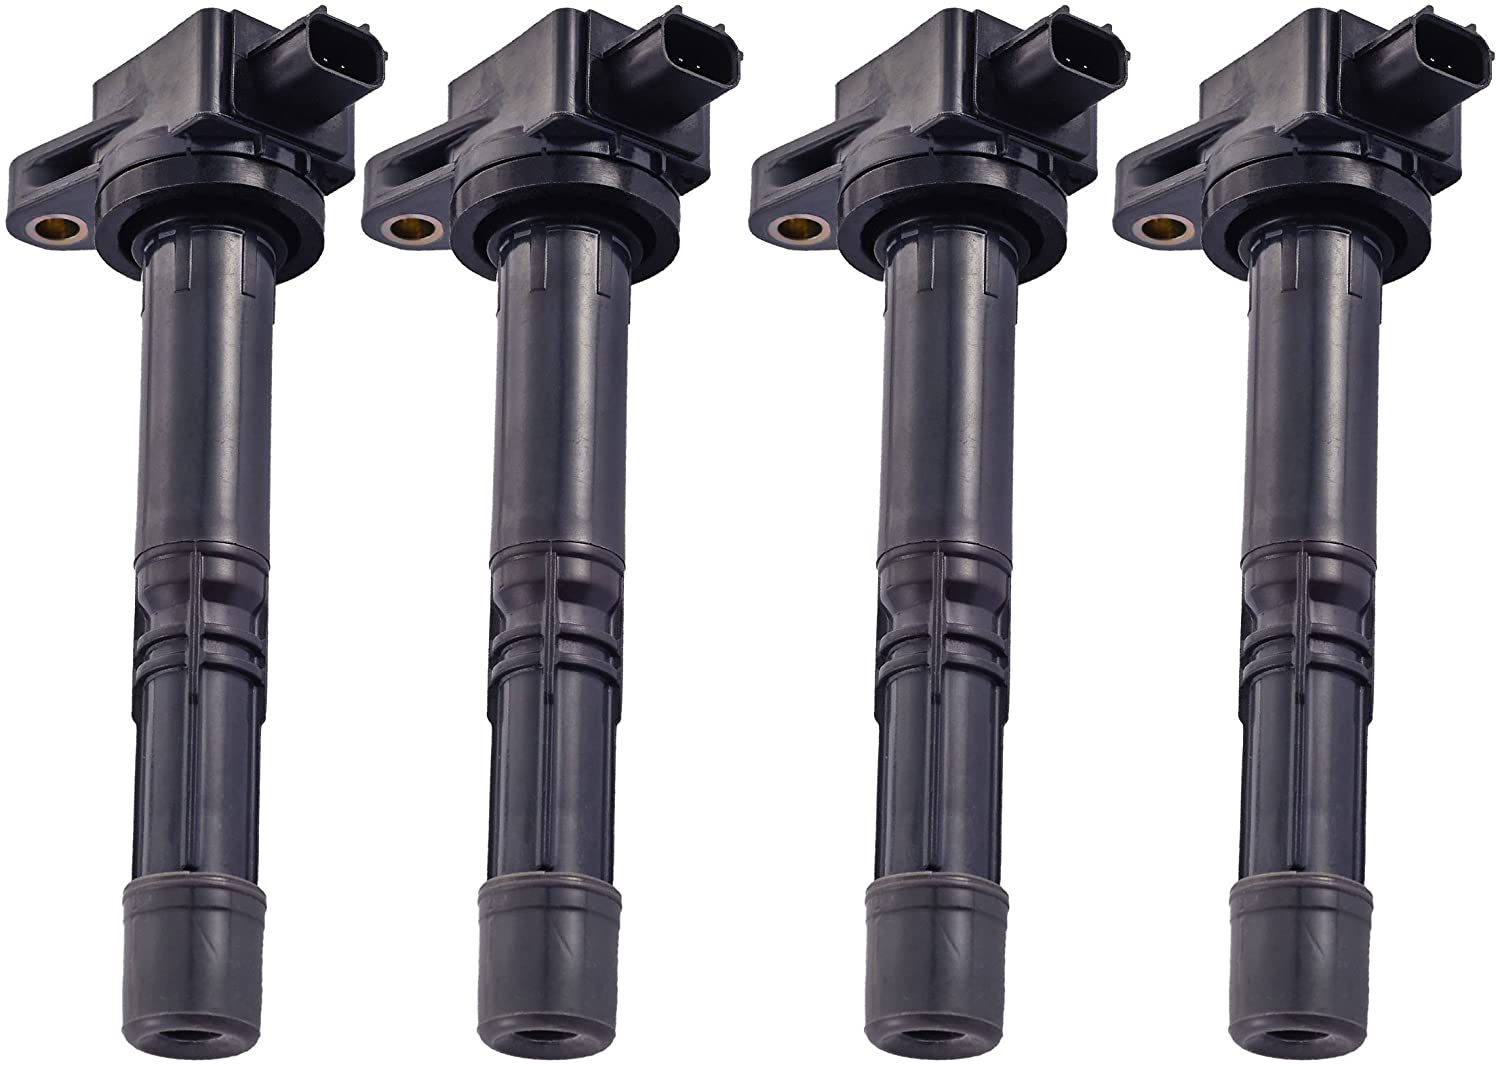 ENA Pack of 4 Ignition Coils compatible with 2008-2015 Honda Accord Civic CR-V Crosstour 2013-2015 Acura ILX 2.4L L4 UF602 30520-R40-007